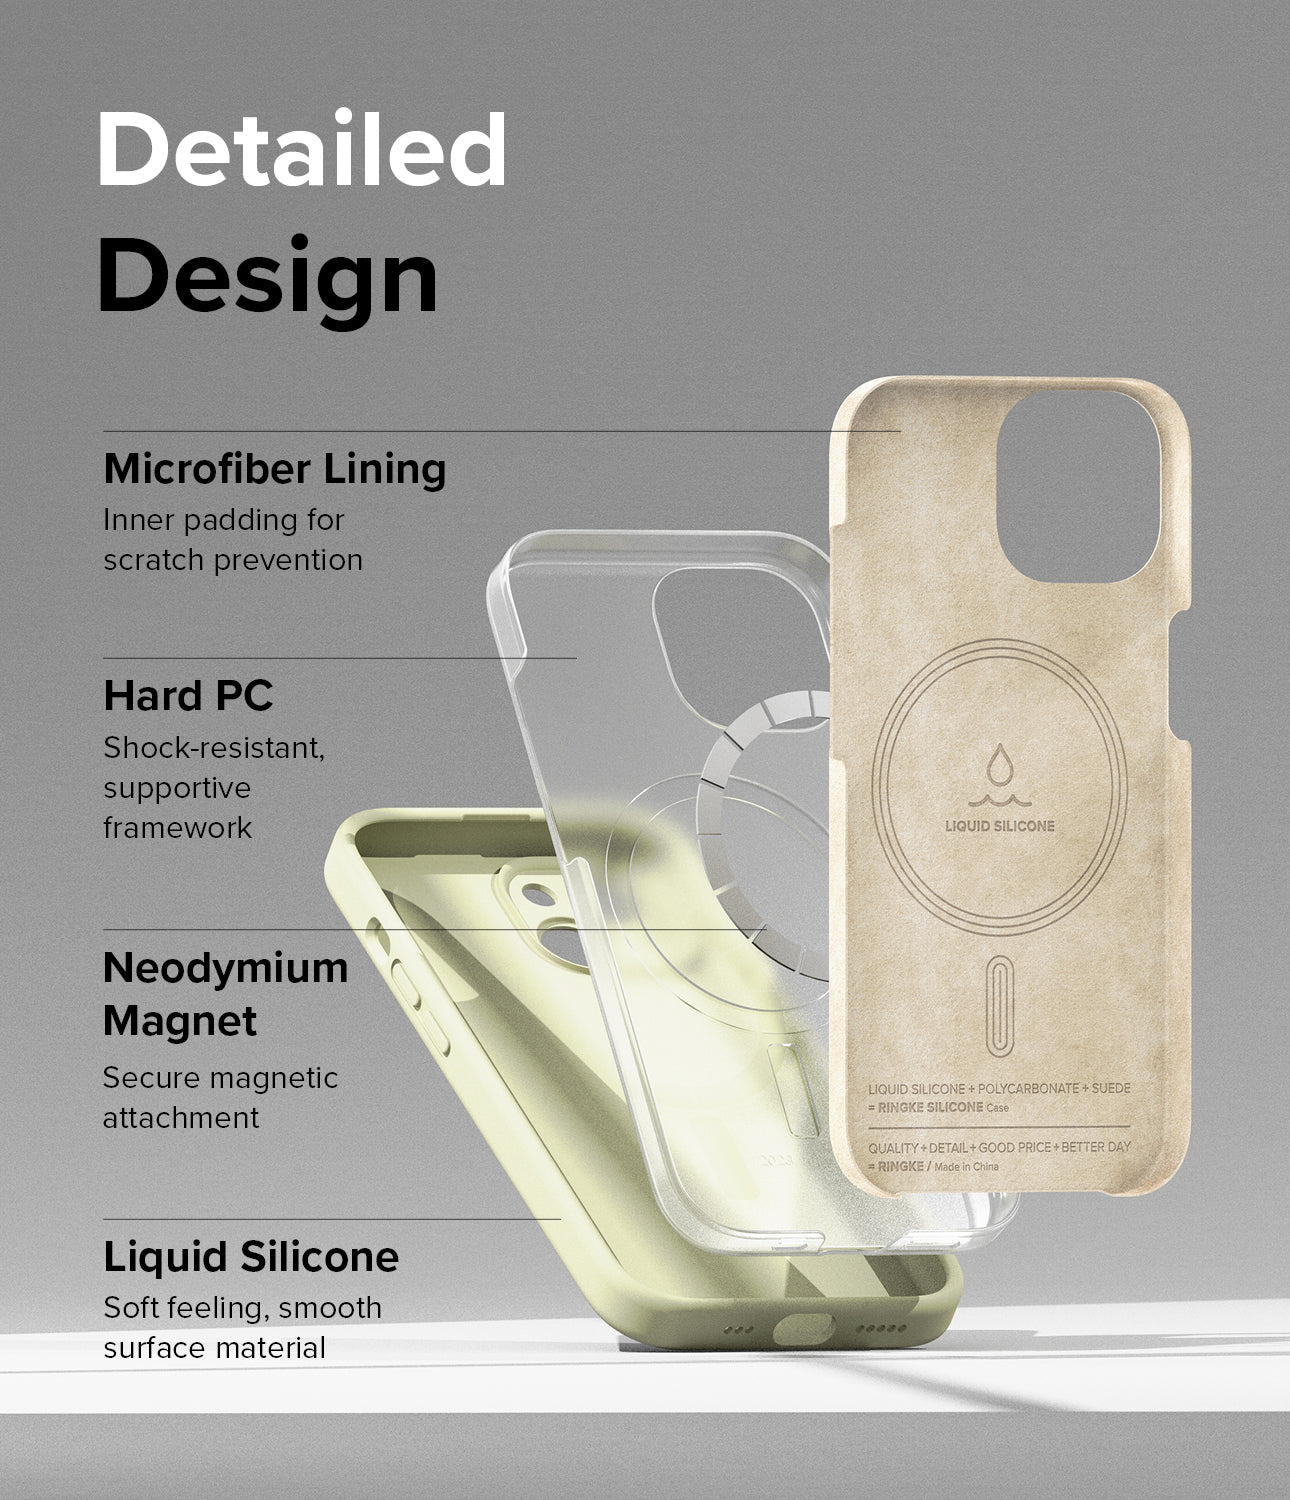 iPhone 15 Case | Silicone Magnetic - Sunny Lime - Detailed Design. Inner padding for scratch prevention with Microfiber lining. Shock-resistant, supportive framework with Hard PC. Secure magnetic attachment with Neodymium Magnet. Soft feeling, smooth surface material with Liquid Silicone.